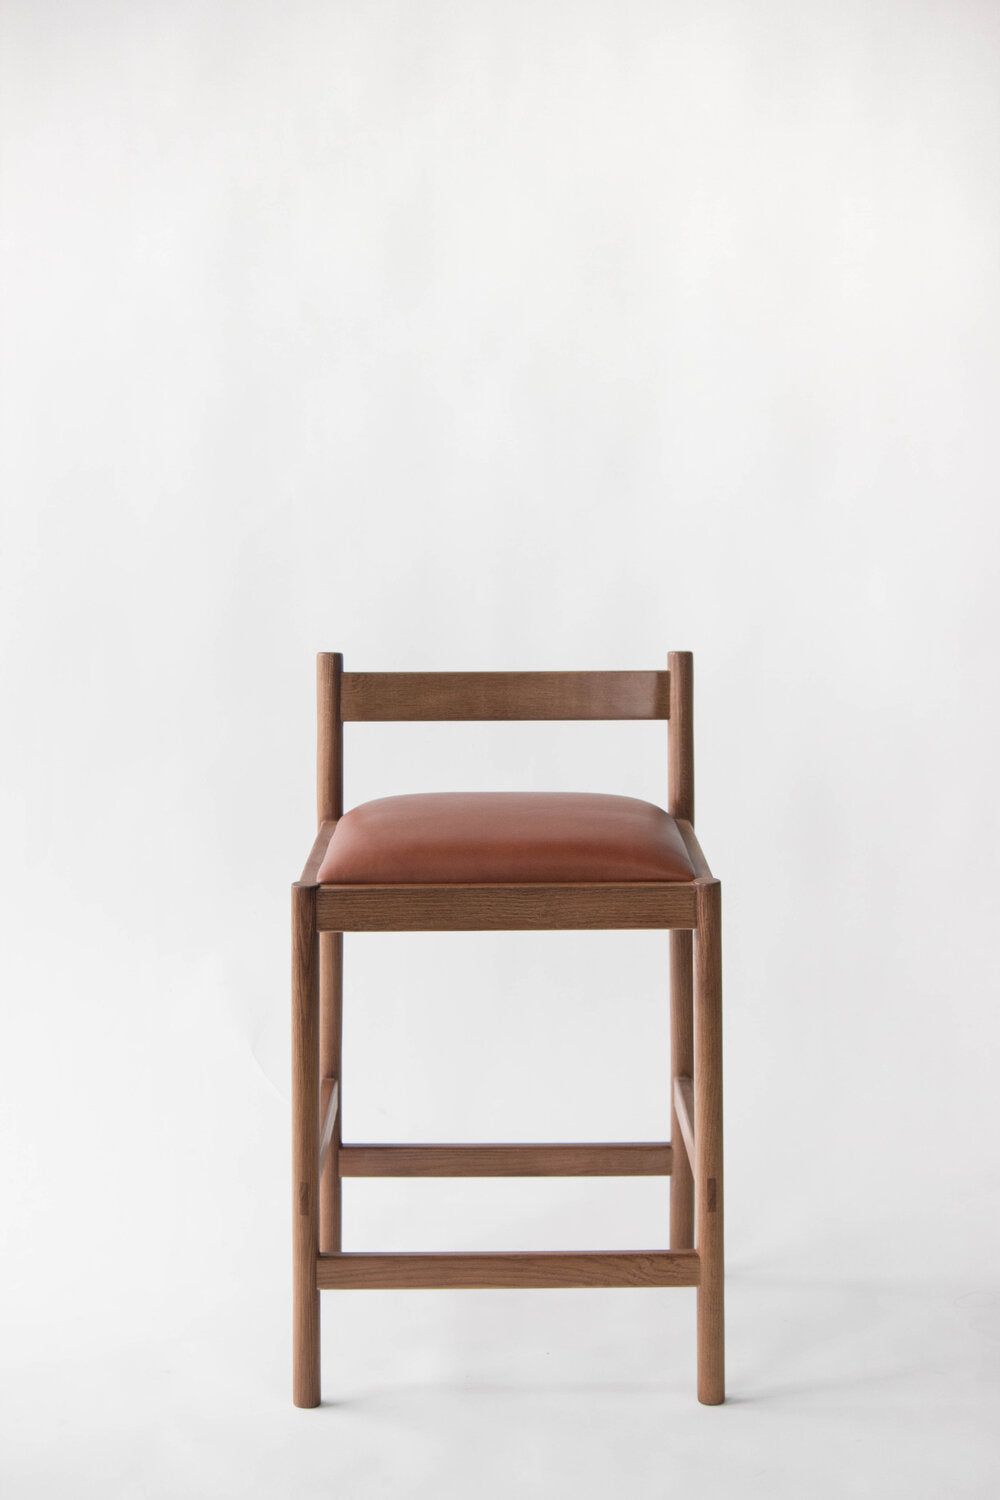 Selecting a right counter height stool